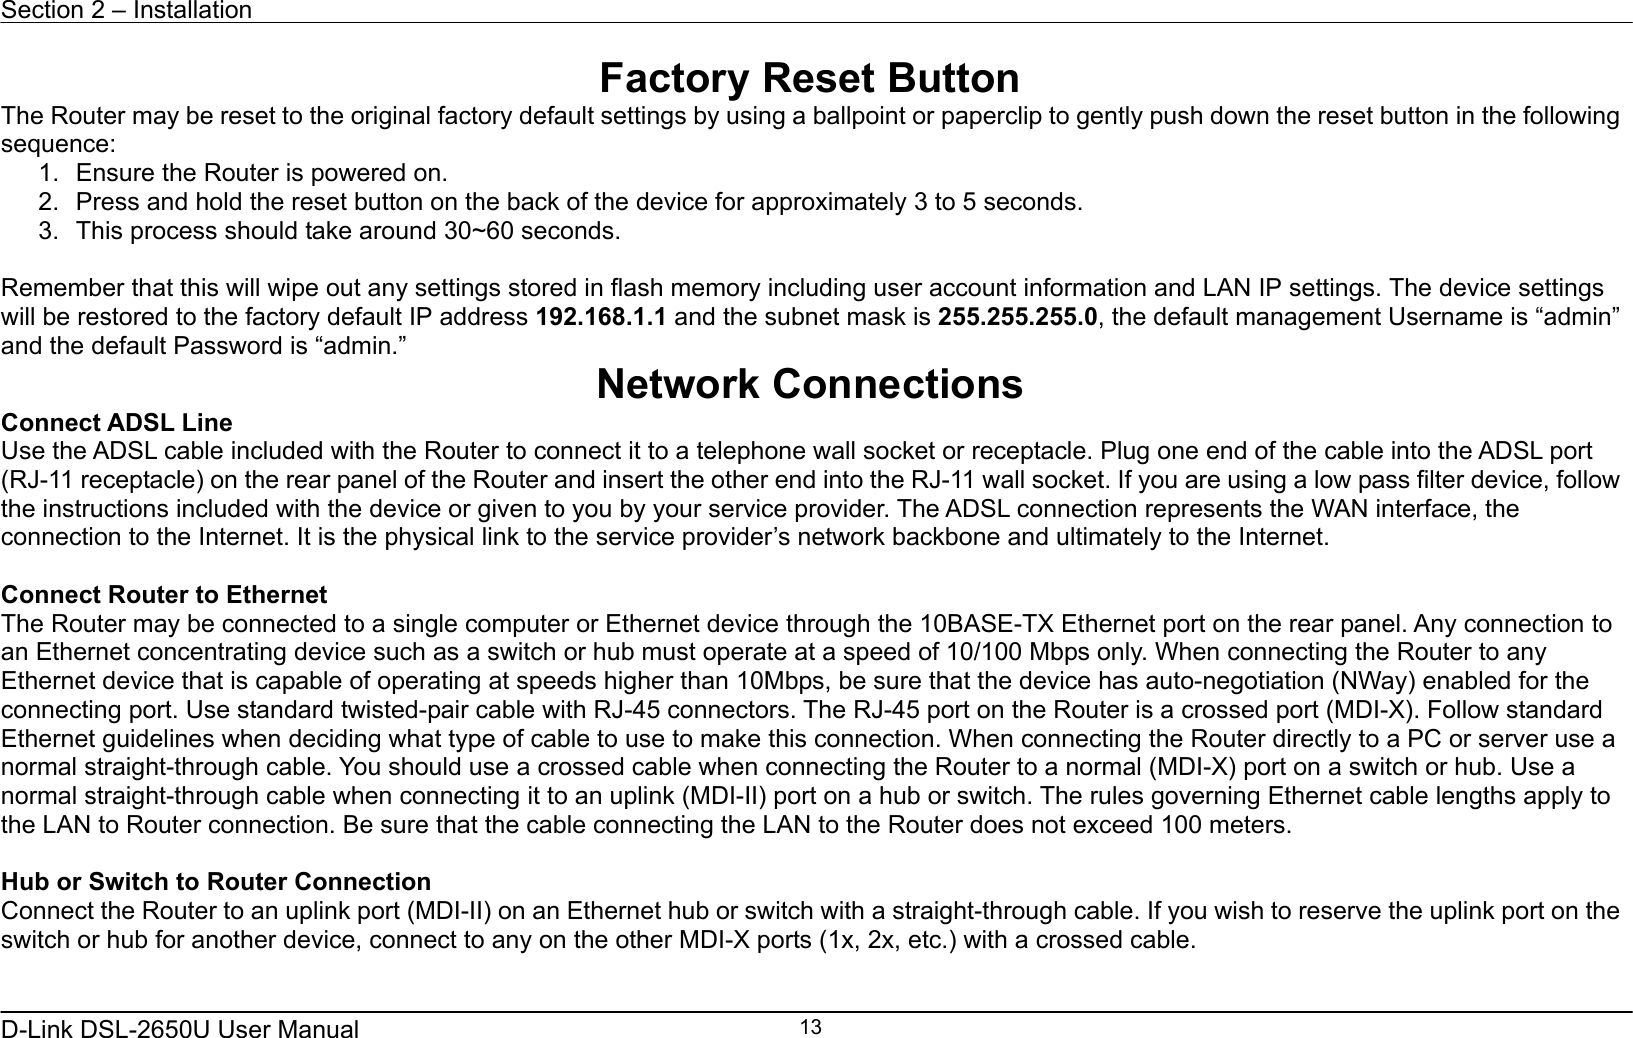 Section 2 – Installation   D-Link DSL-2650U User Manual    13Factory Reset Button The Router may be reset to the original factory default settings by using a ballpoint or paperclip to gently push down the reset button in the following sequence:  1.  Ensure the Router is powered on. 2.  Press and hold the reset button on the back of the device for approximately 3 to 5 seconds. 3.  This process should take around 30~60 seconds.  Remember that this will wipe out any settings stored in flash memory including user account information and LAN IP settings. The device settings will be restored to the factory default IP address 192.168.1.1 and the subnet mask is 255.255.255.0, the default management Username is “admin” and the default Password is “admin.” Network Connections   Connect ADSL Line Use the ADSL cable included with the Router to connect it to a telephone wall socket or receptacle. Plug one end of the cable into the ADSL port (RJ-11 receptacle) on the rear panel of the Router and insert the other end into the RJ-11 wall socket. If you are using a low pass filter device, follow the instructions included with the device or given to you by your service provider. The ADSL connection represents the WAN interface, the connection to the Internet. It is the physical link to the service provider’s network backbone and ultimately to the Internet.    Connect Router to Ethernet   The Router may be connected to a single computer or Ethernet device through the 10BASE-TX Ethernet port on the rear panel. Any connection to an Ethernet concentrating device such as a switch or hub must operate at a speed of 10/100 Mbps only. When connecting the Router to any Ethernet device that is capable of operating at speeds higher than 10Mbps, be sure that the device has auto-negotiation (NWay) enabled for the connecting port. Use standard twisted-pair cable with RJ-45 connectors. The RJ-45 port on the Router is a crossed port (MDI-X). Follow standard Ethernet guidelines when deciding what type of cable to use to make this connection. When connecting the Router directly to a PC or server use a normal straight-through cable. You should use a crossed cable when connecting the Router to a normal (MDI-X) port on a switch or hub. Use a normal straight-through cable when connecting it to an uplink (MDI-II) port on a hub or switch. The rules governing Ethernet cable lengths apply to the LAN to Router connection. Be sure that the cable connecting the LAN to the Router does not exceed 100 meters.  Hub or Switch to Router Connection Connect the Router to an uplink port (MDI-II) on an Ethernet hub or switch with a straight-through cable. If you wish to reserve the uplink port on the switch or hub for another device, connect to any on the other MDI-X ports (1x, 2x, etc.) with a crossed cable.   